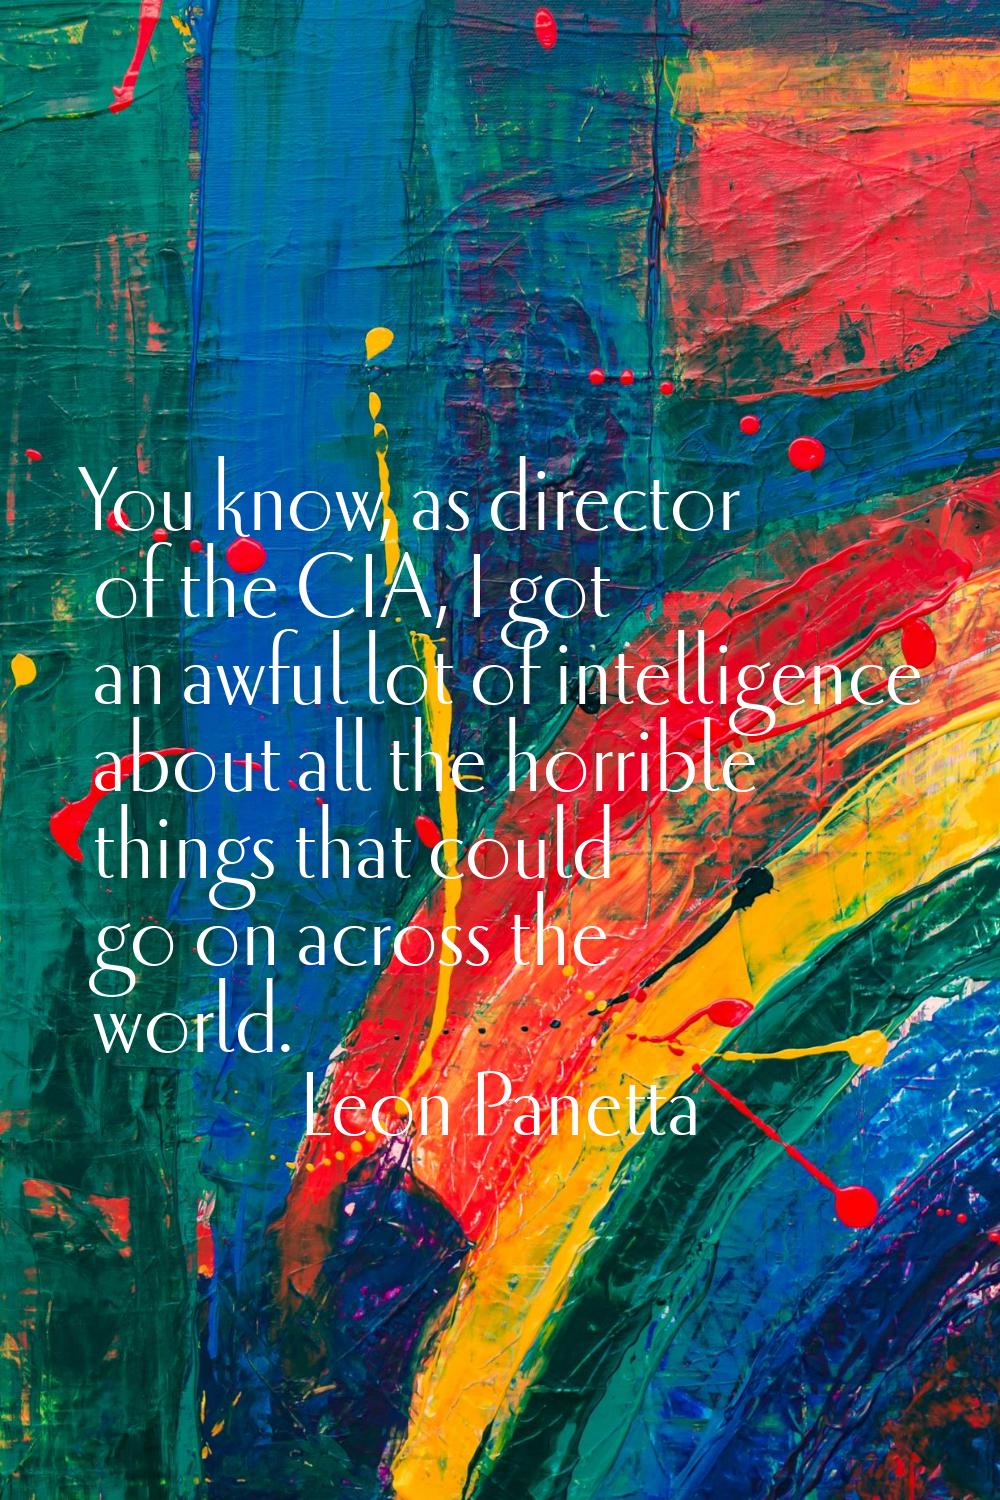 You know, as director of the CIA, I got an awful lot of intelligence about all the horrible things 